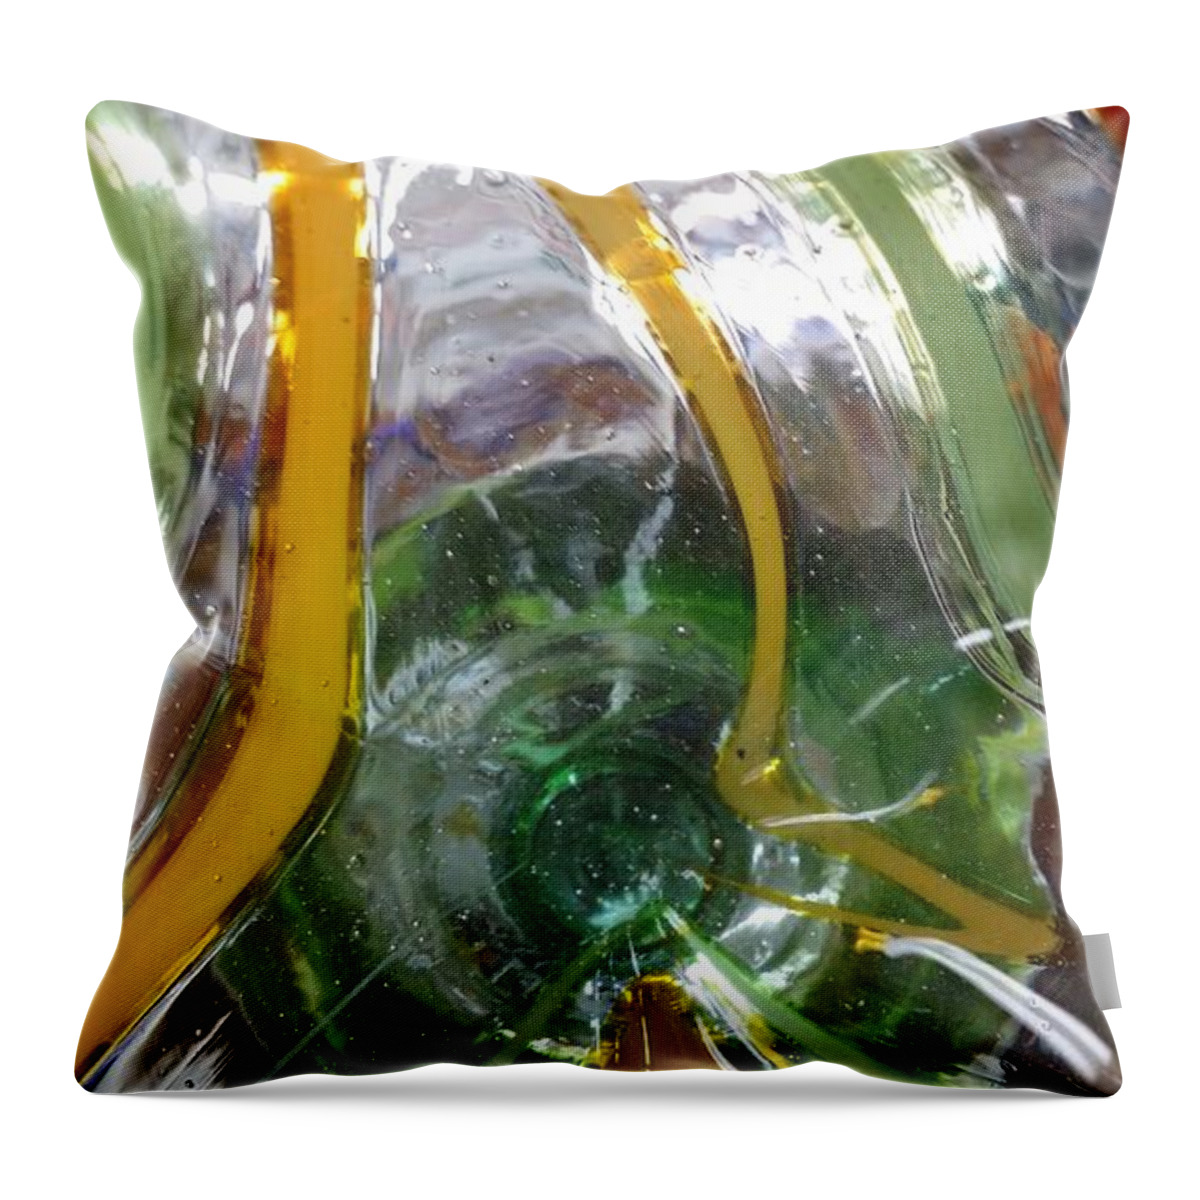 Realality Throw Pillow featuring the photograph Bottoms Up 2 by Scott S Baker